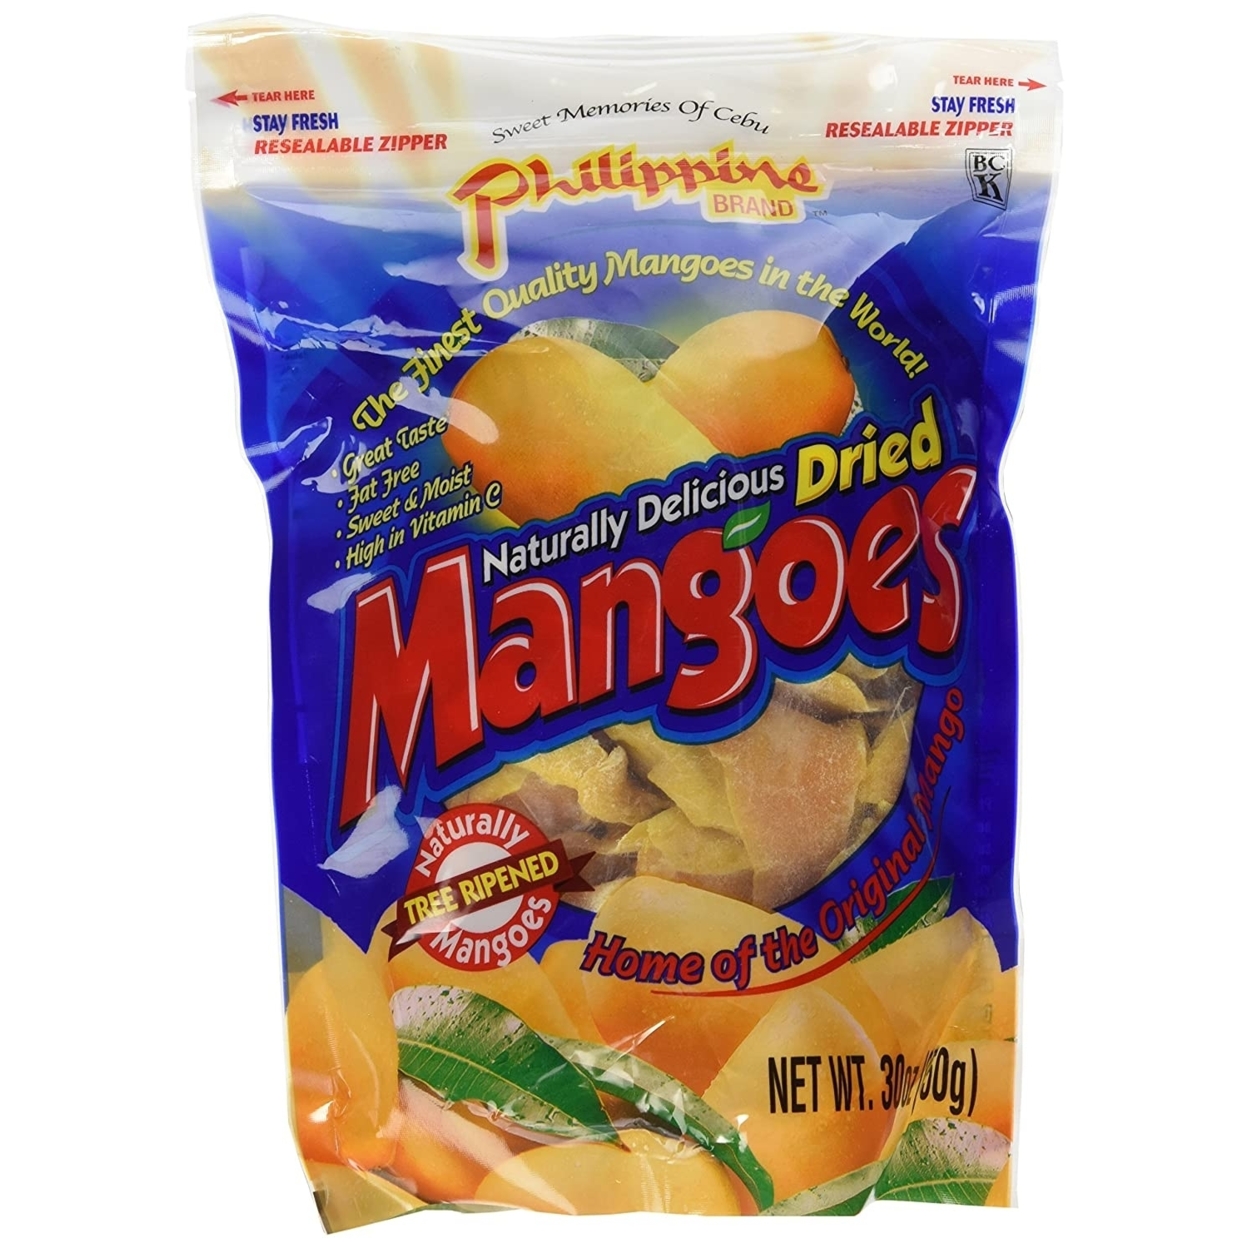 Phillippine Brand Naturally Delicious Tree Ripened Dried Mangoes, 30 Ounce